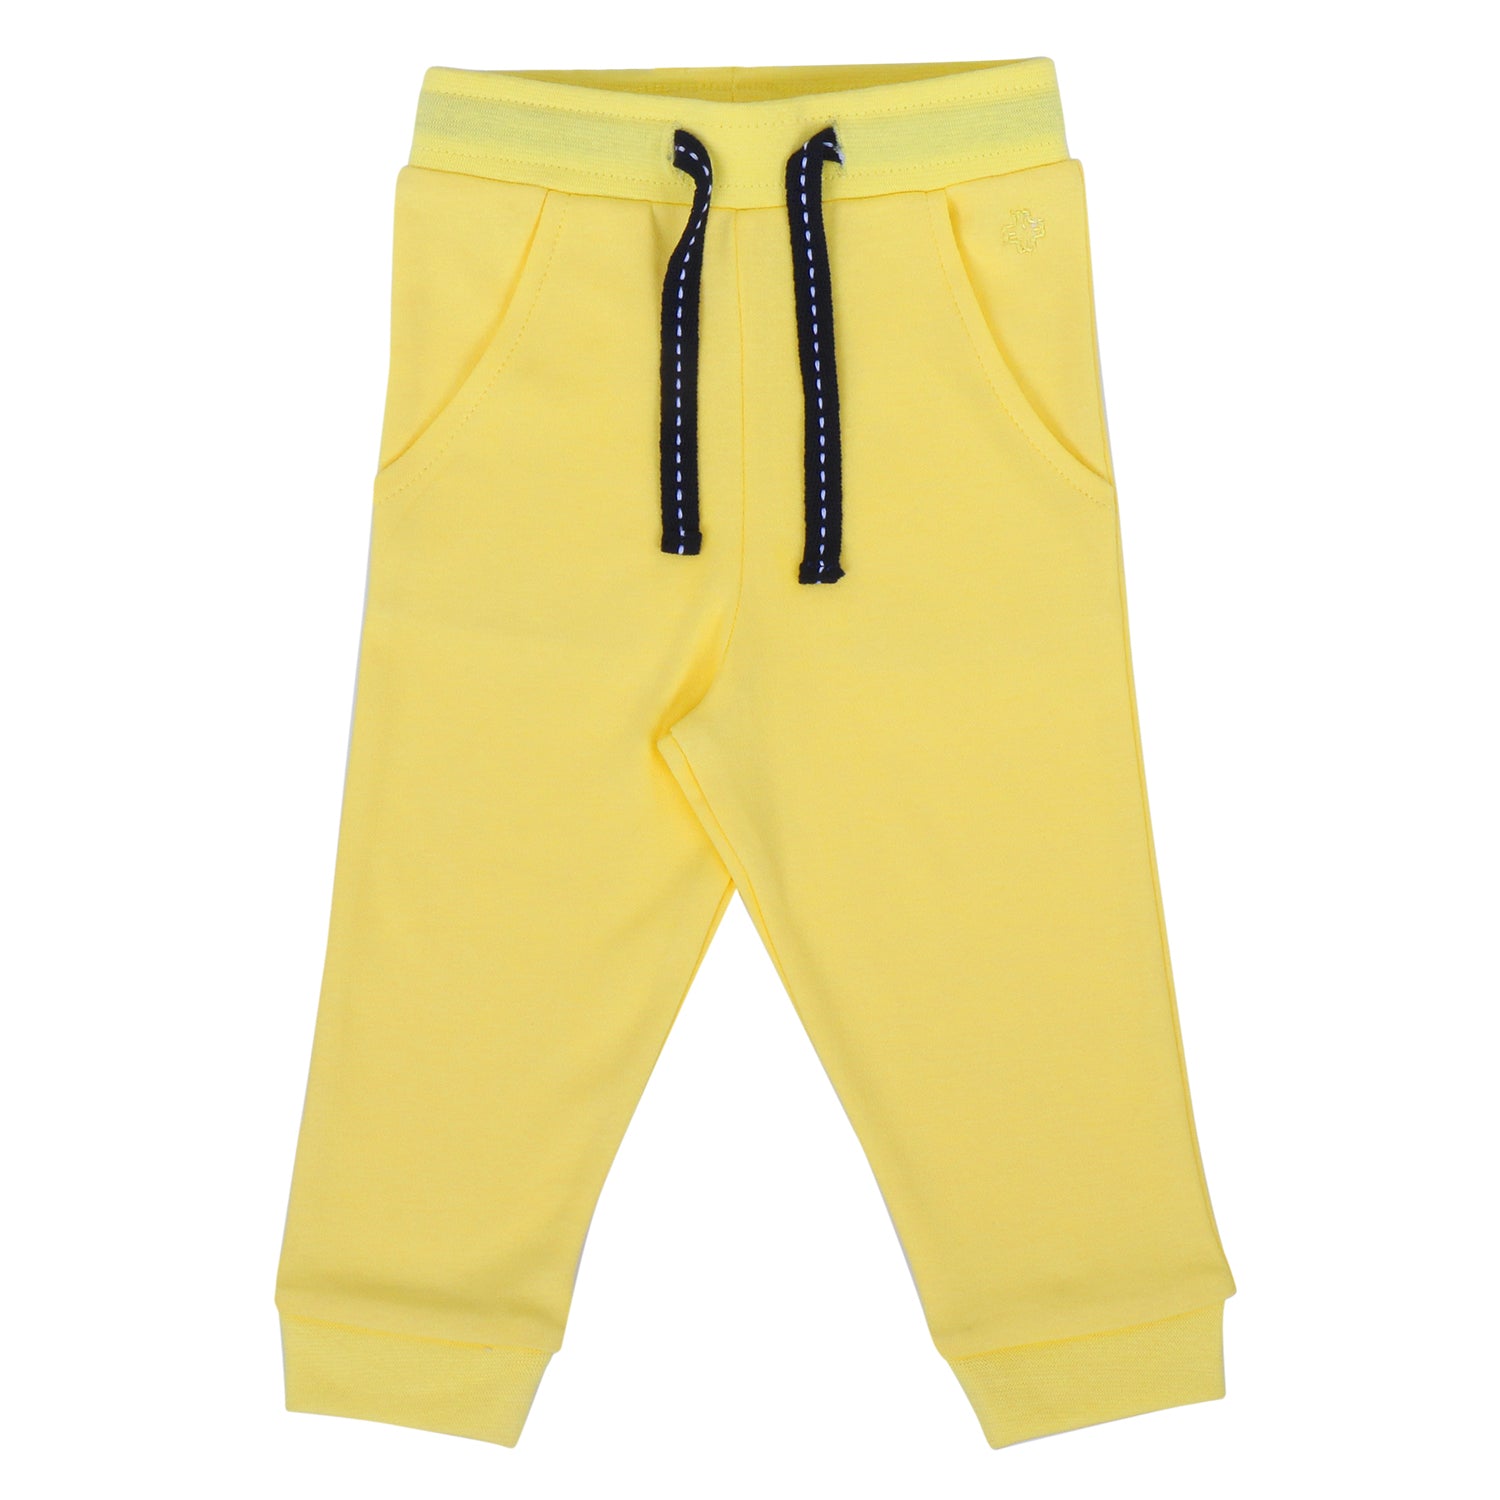 My Milestones Joggers - Baby Blue  Cloud / Yellow - 2 PC Pack